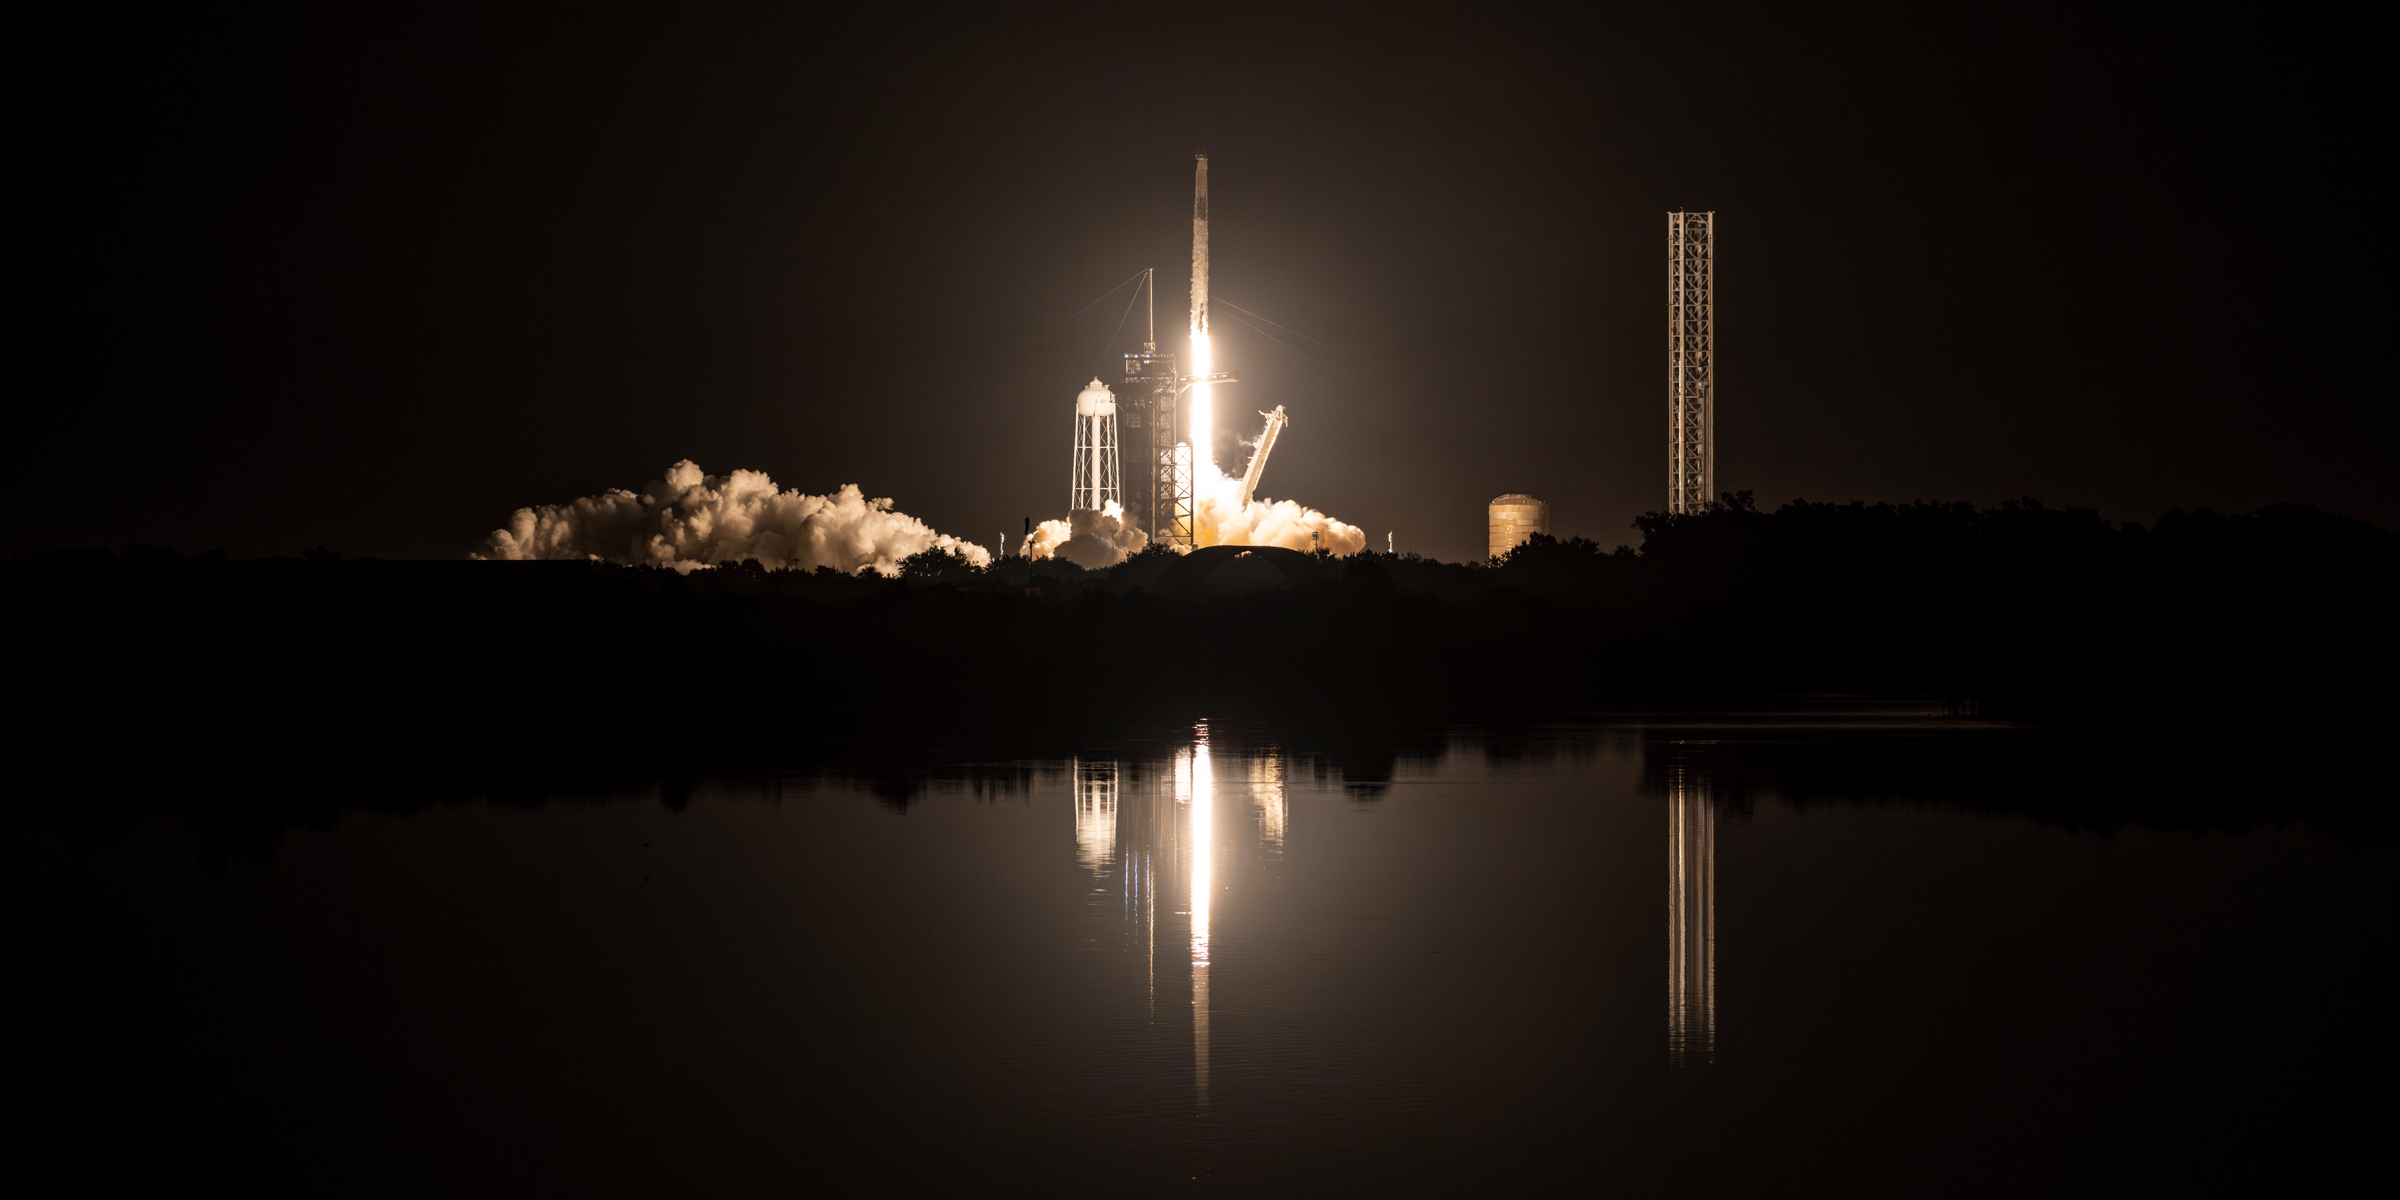 Falcon 9 lifting off with Crew Dragon Endurance. AS seen from the LC-39A Press Site lawn. Overlooking the Turn Basin at night.